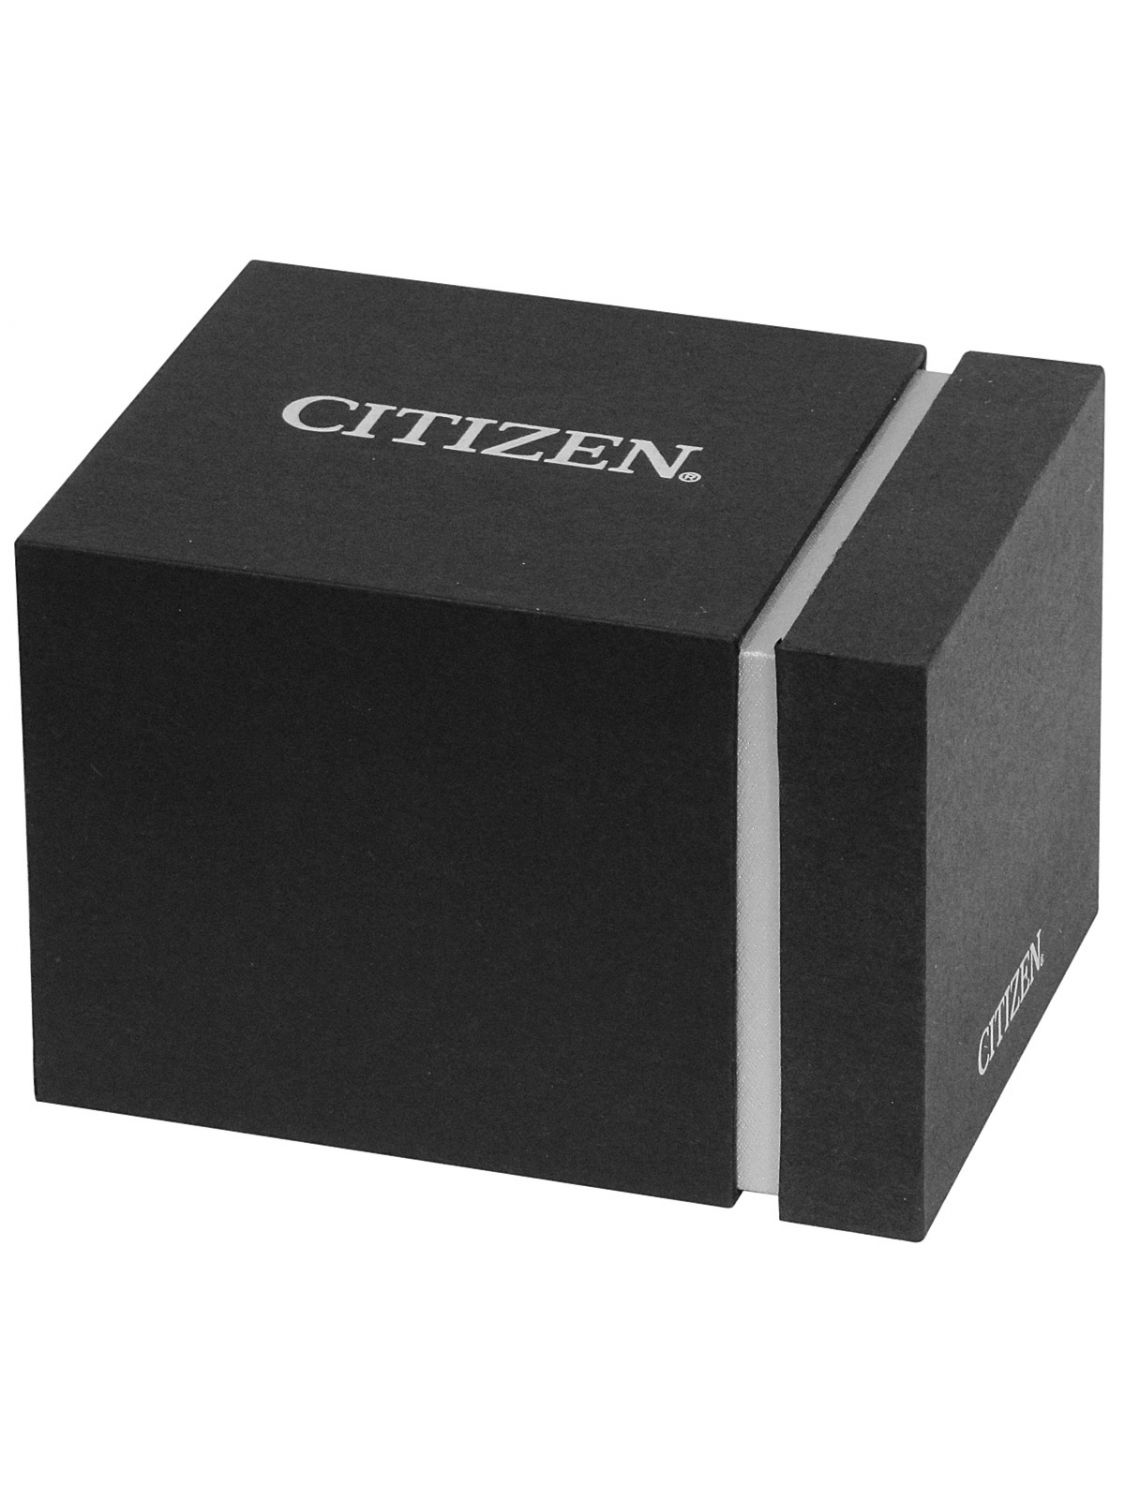 Citizen Eco-Drive Radio Controlled Men's Watch Black CB0250-84E – Watches &  Crystals